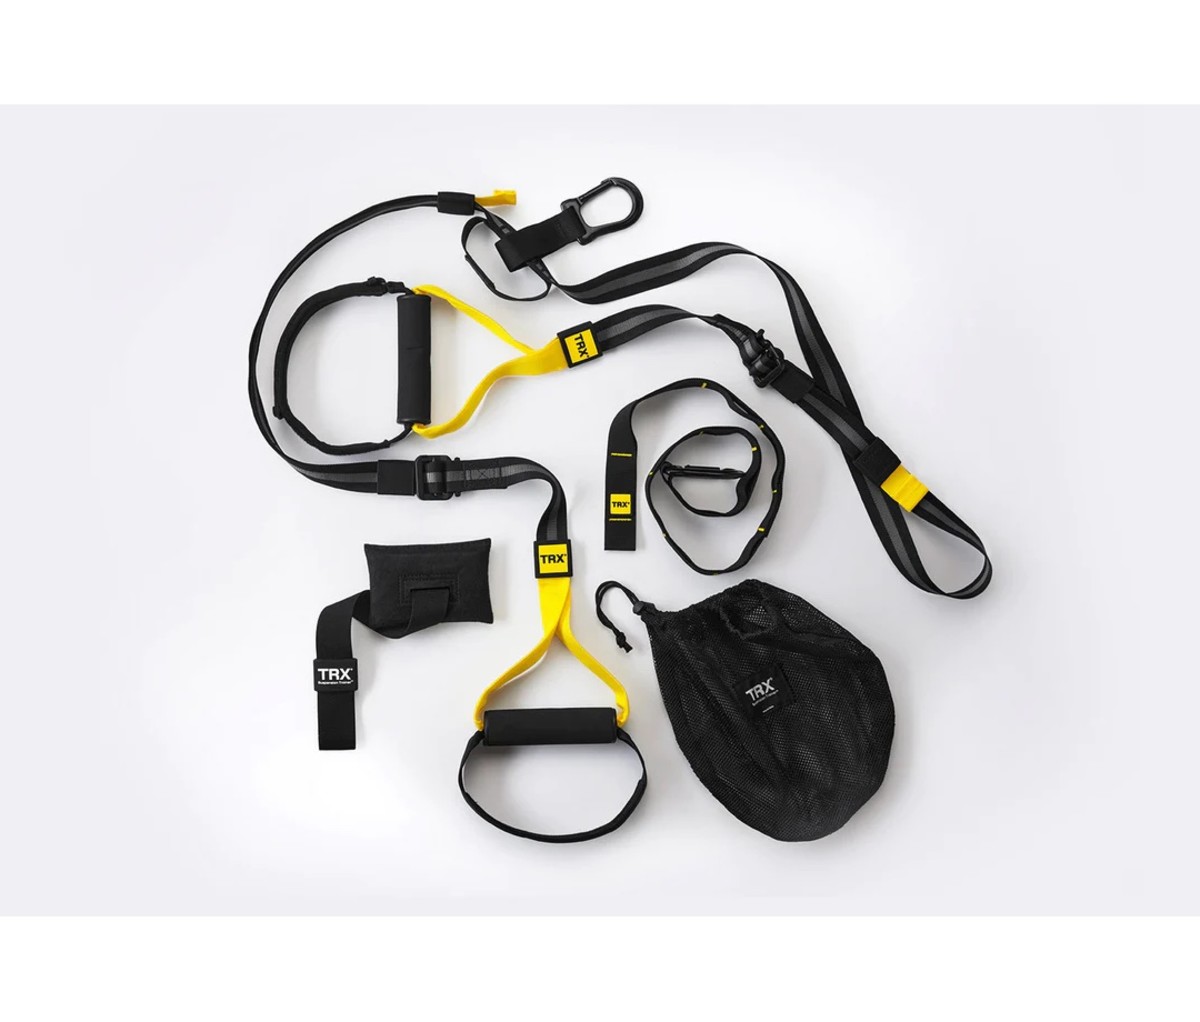 The TRX Home2 is the ultimate compact home gym system.